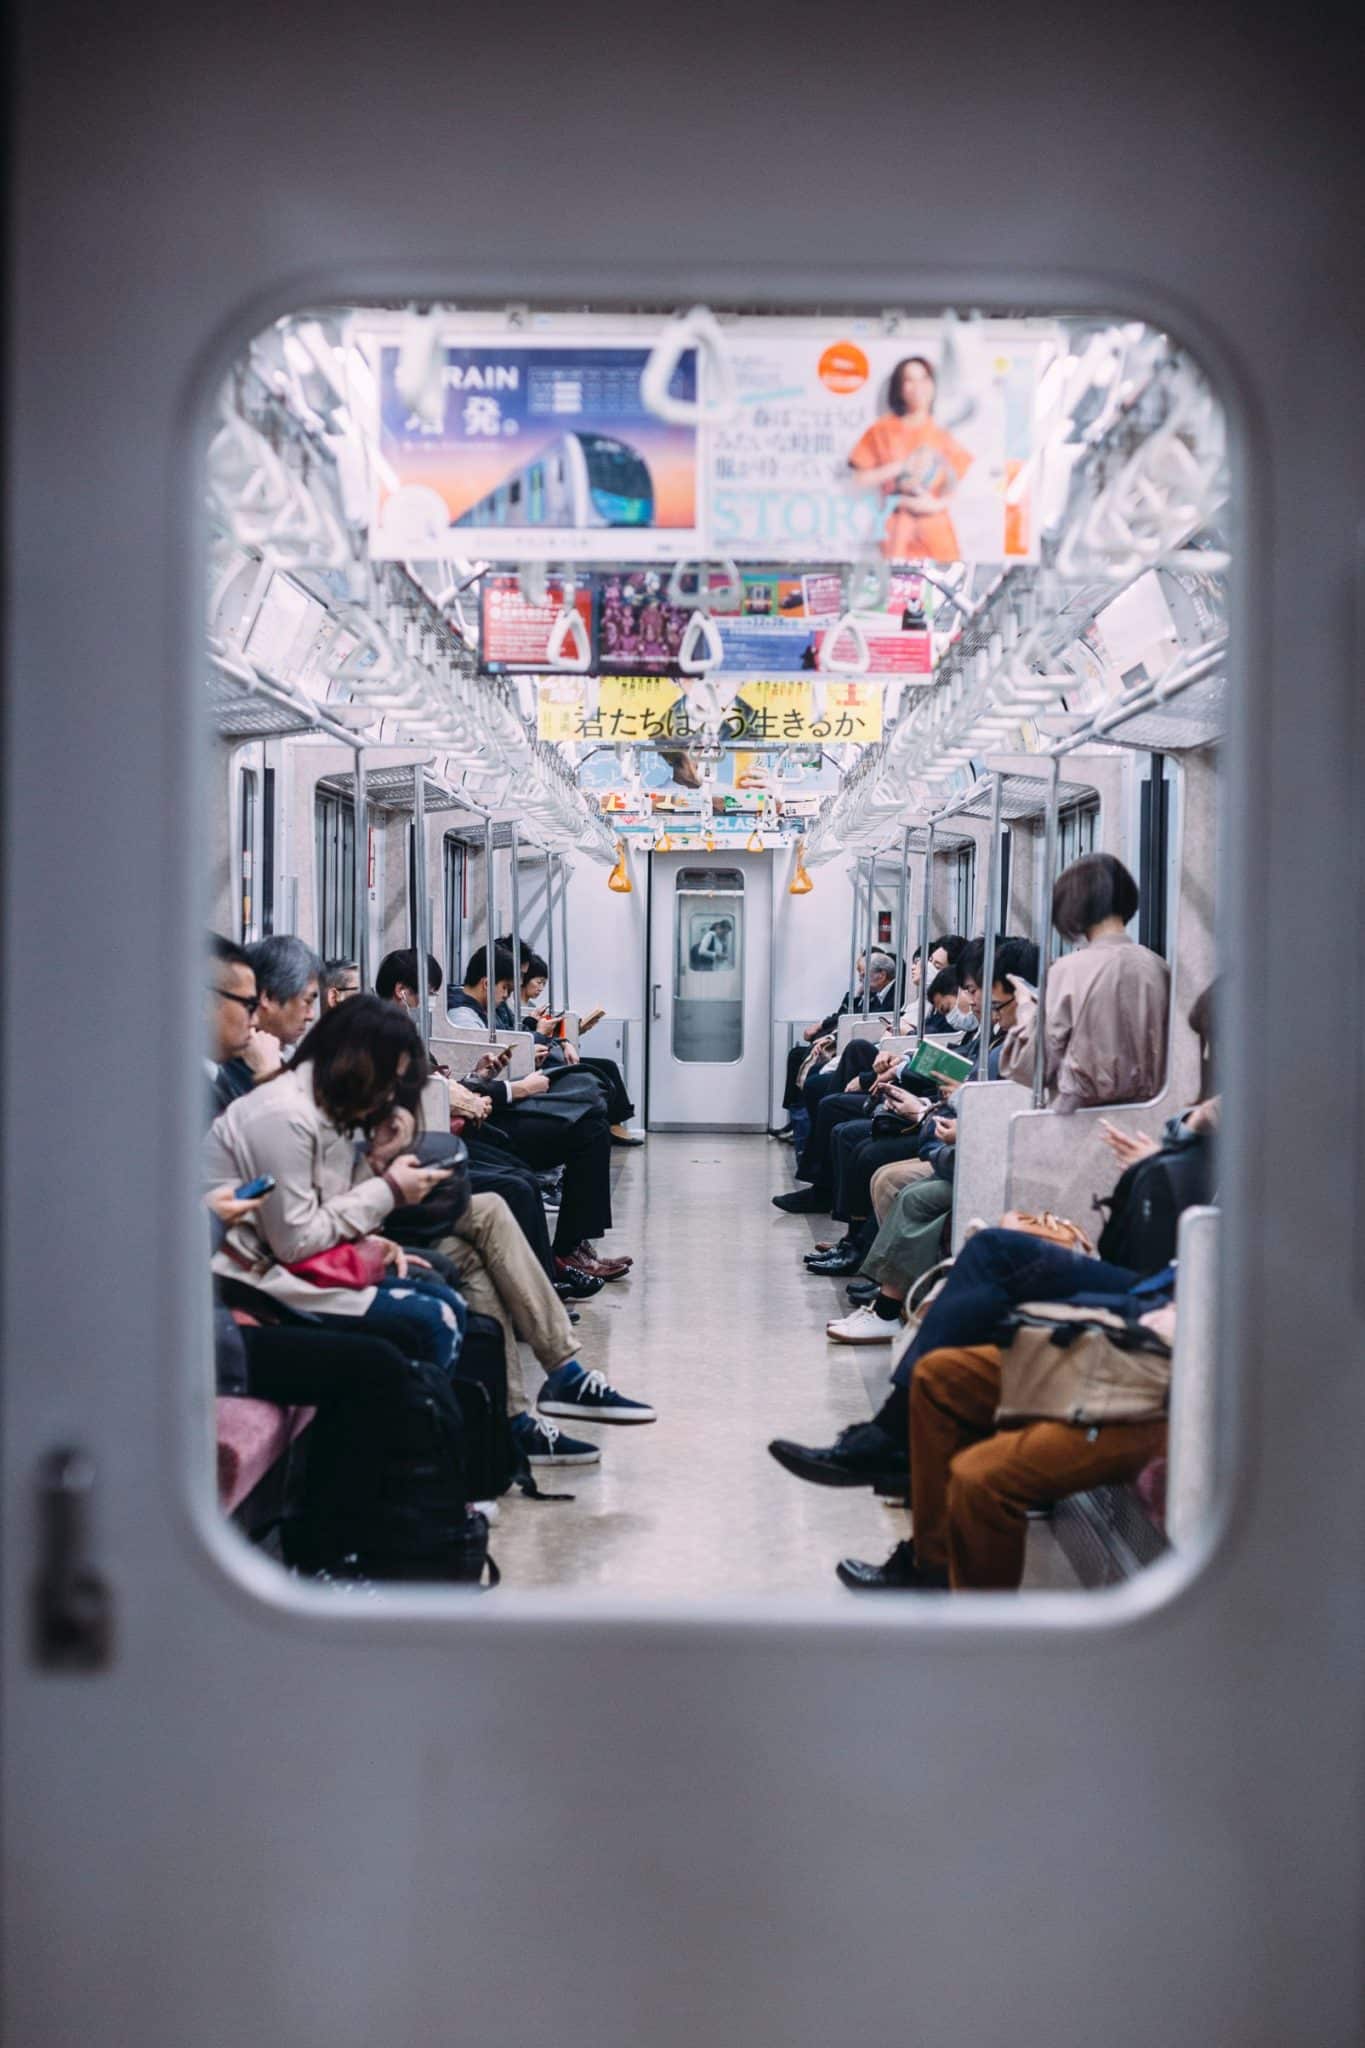 Photo of Japanese people on a train by Liam Burnett-Blue for Unsplash